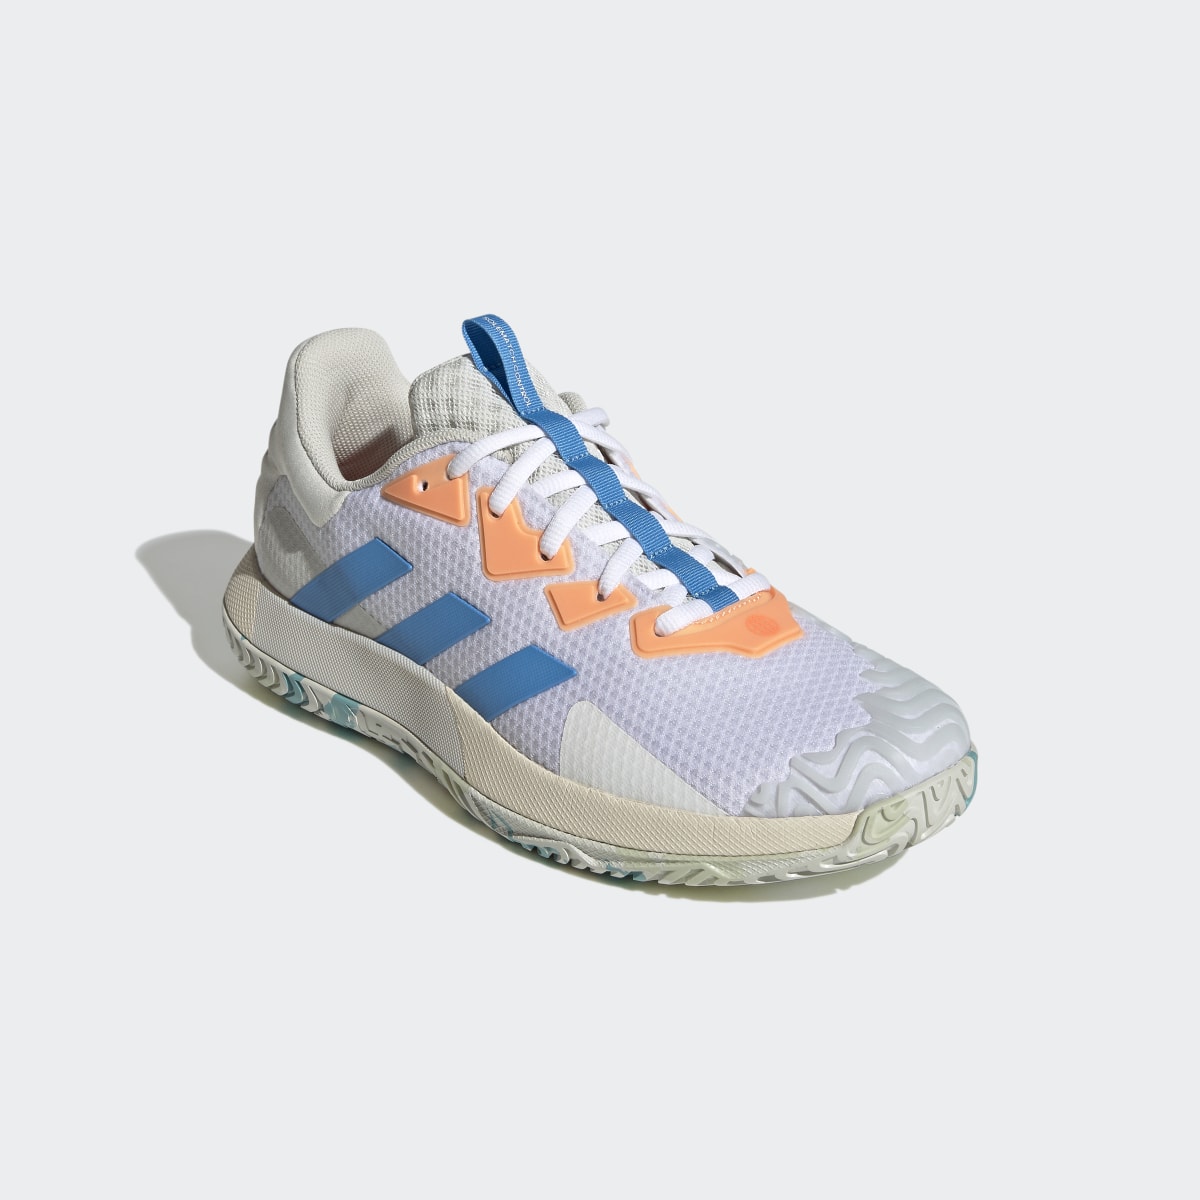 Adidas SoleMatch Control Tennis Shoes. 5